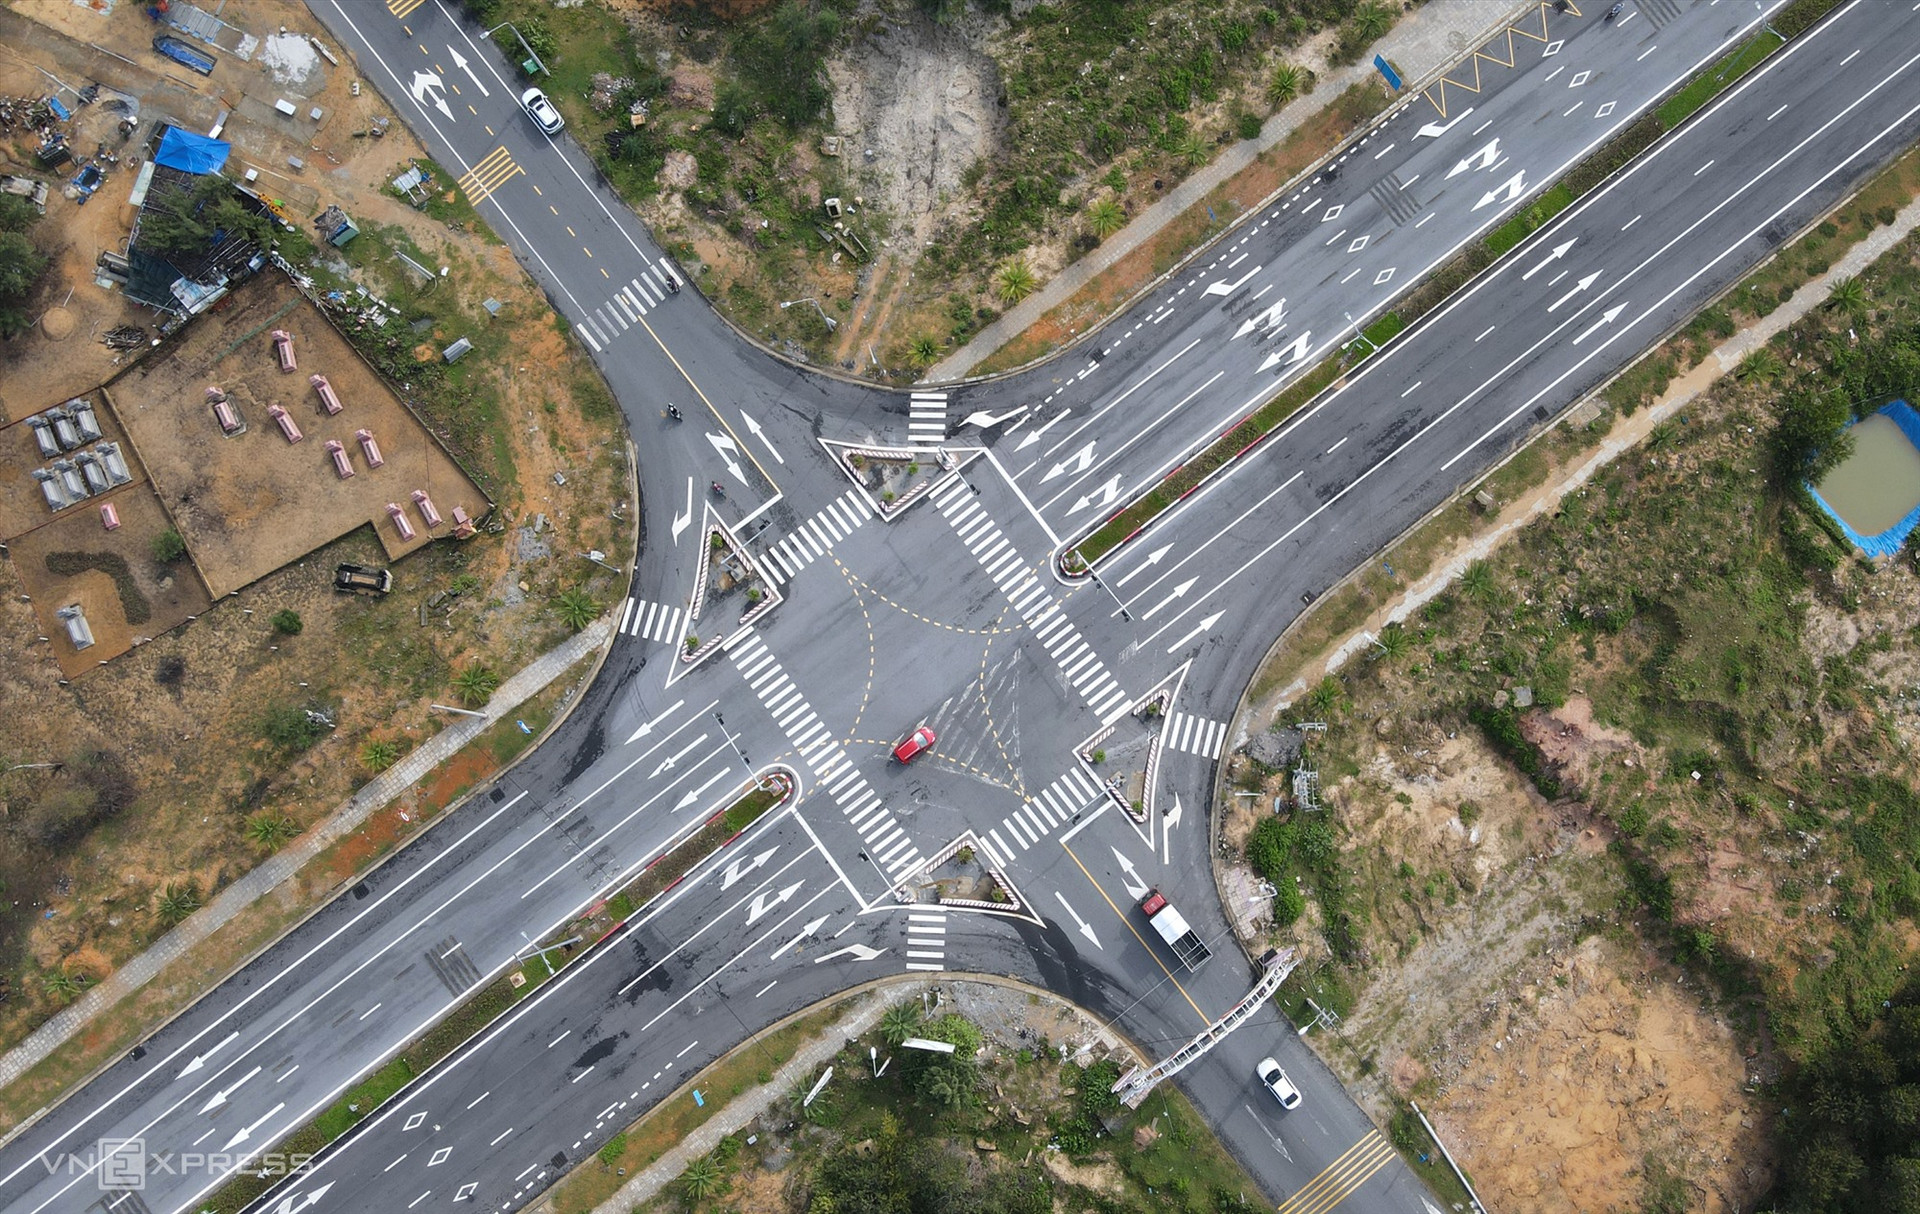 There are 10 intersections at the same level, 7 of which are equipped with traffic lights.